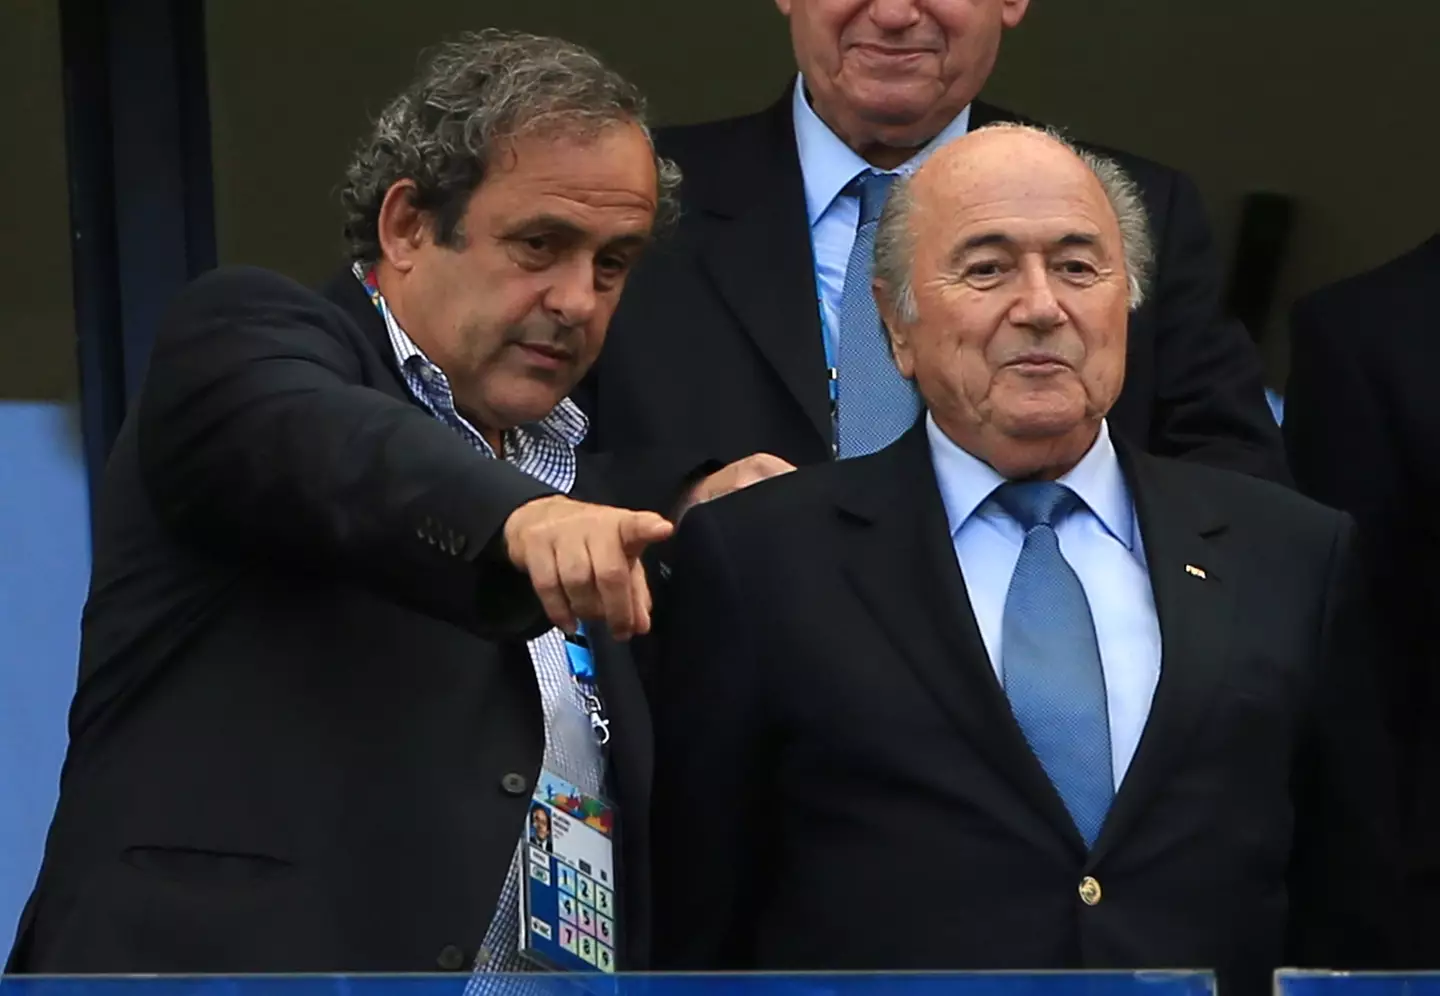 The case ended Platini's hopes of succeeding Blatter as FIFA president (Image: Alamy)